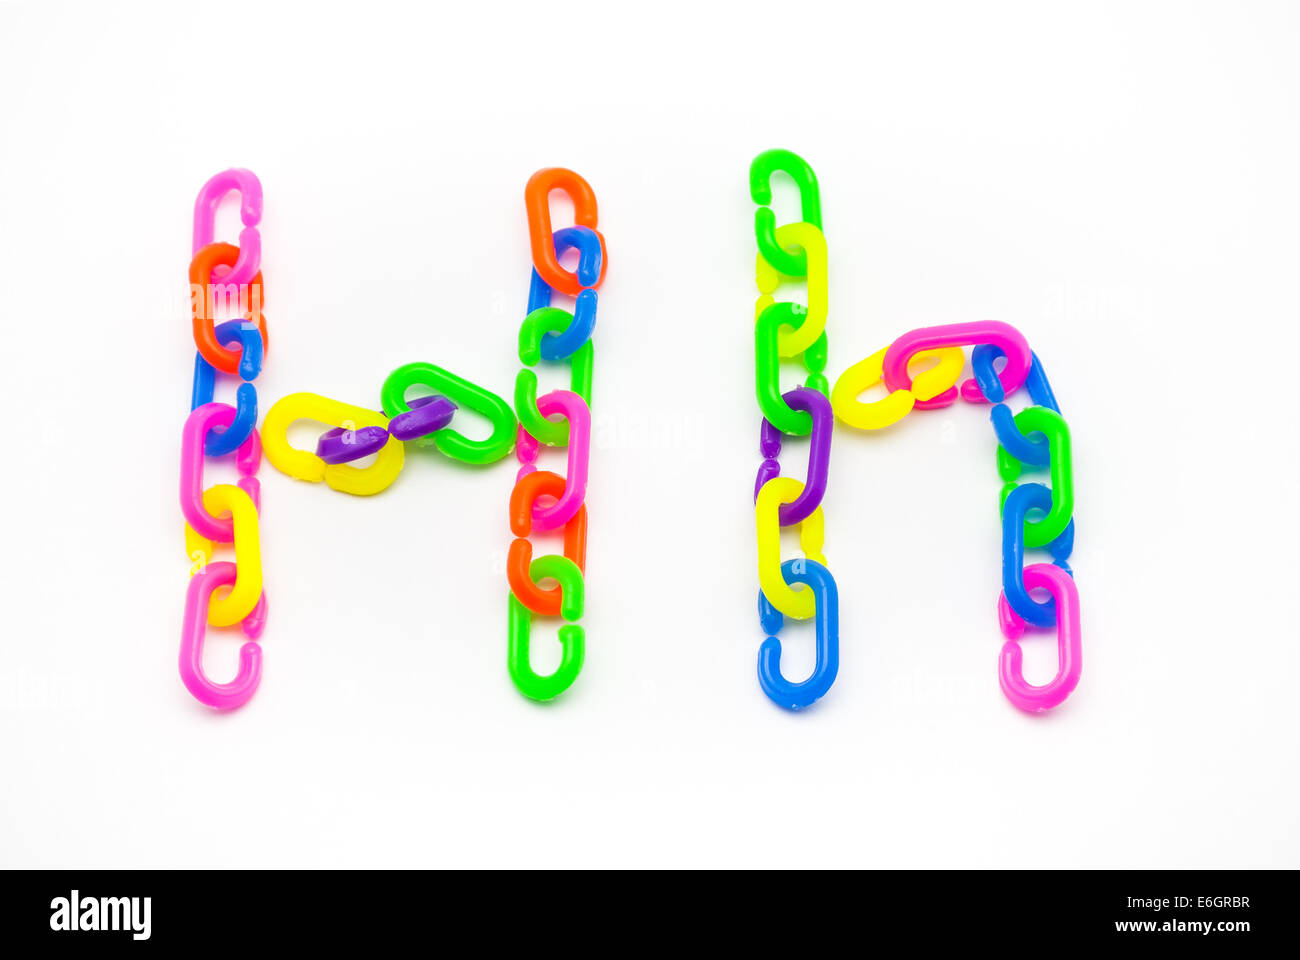 H and h Alphabet, Created by Colorful Plastic Chain. Stock Photo